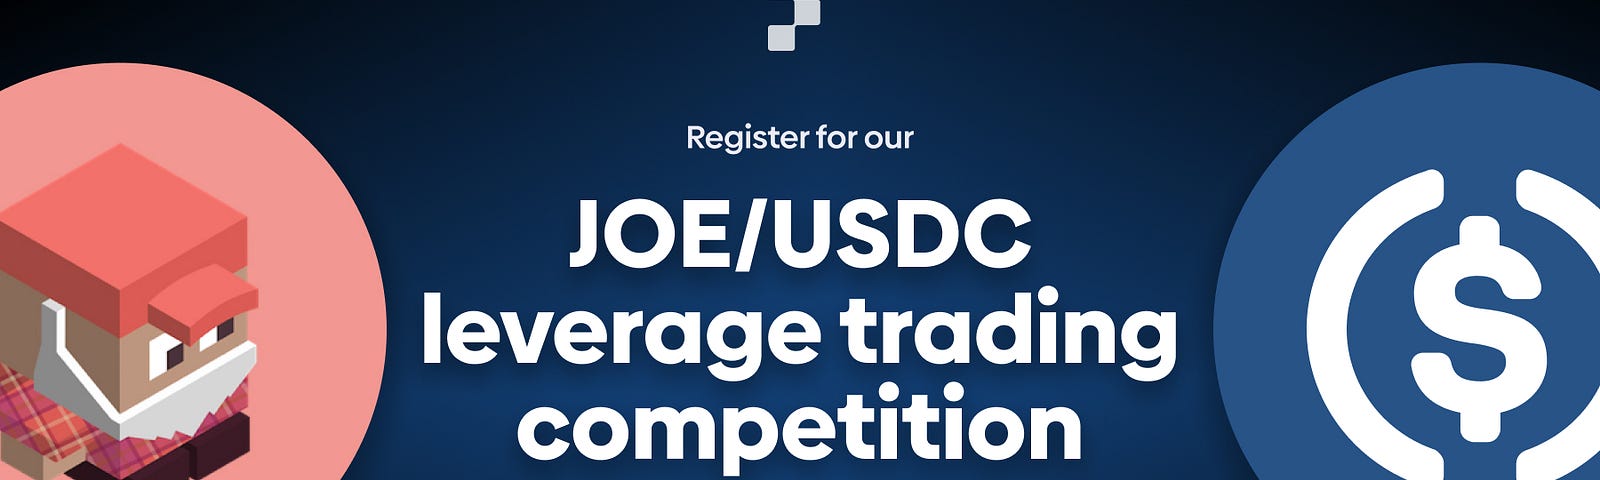 Image of the JOE and USDC token pairs with the text: Register for our JOE/USDC leverage trading competition. $11k in AVAX prizes. x.futureswap.com/joetradingcompetition